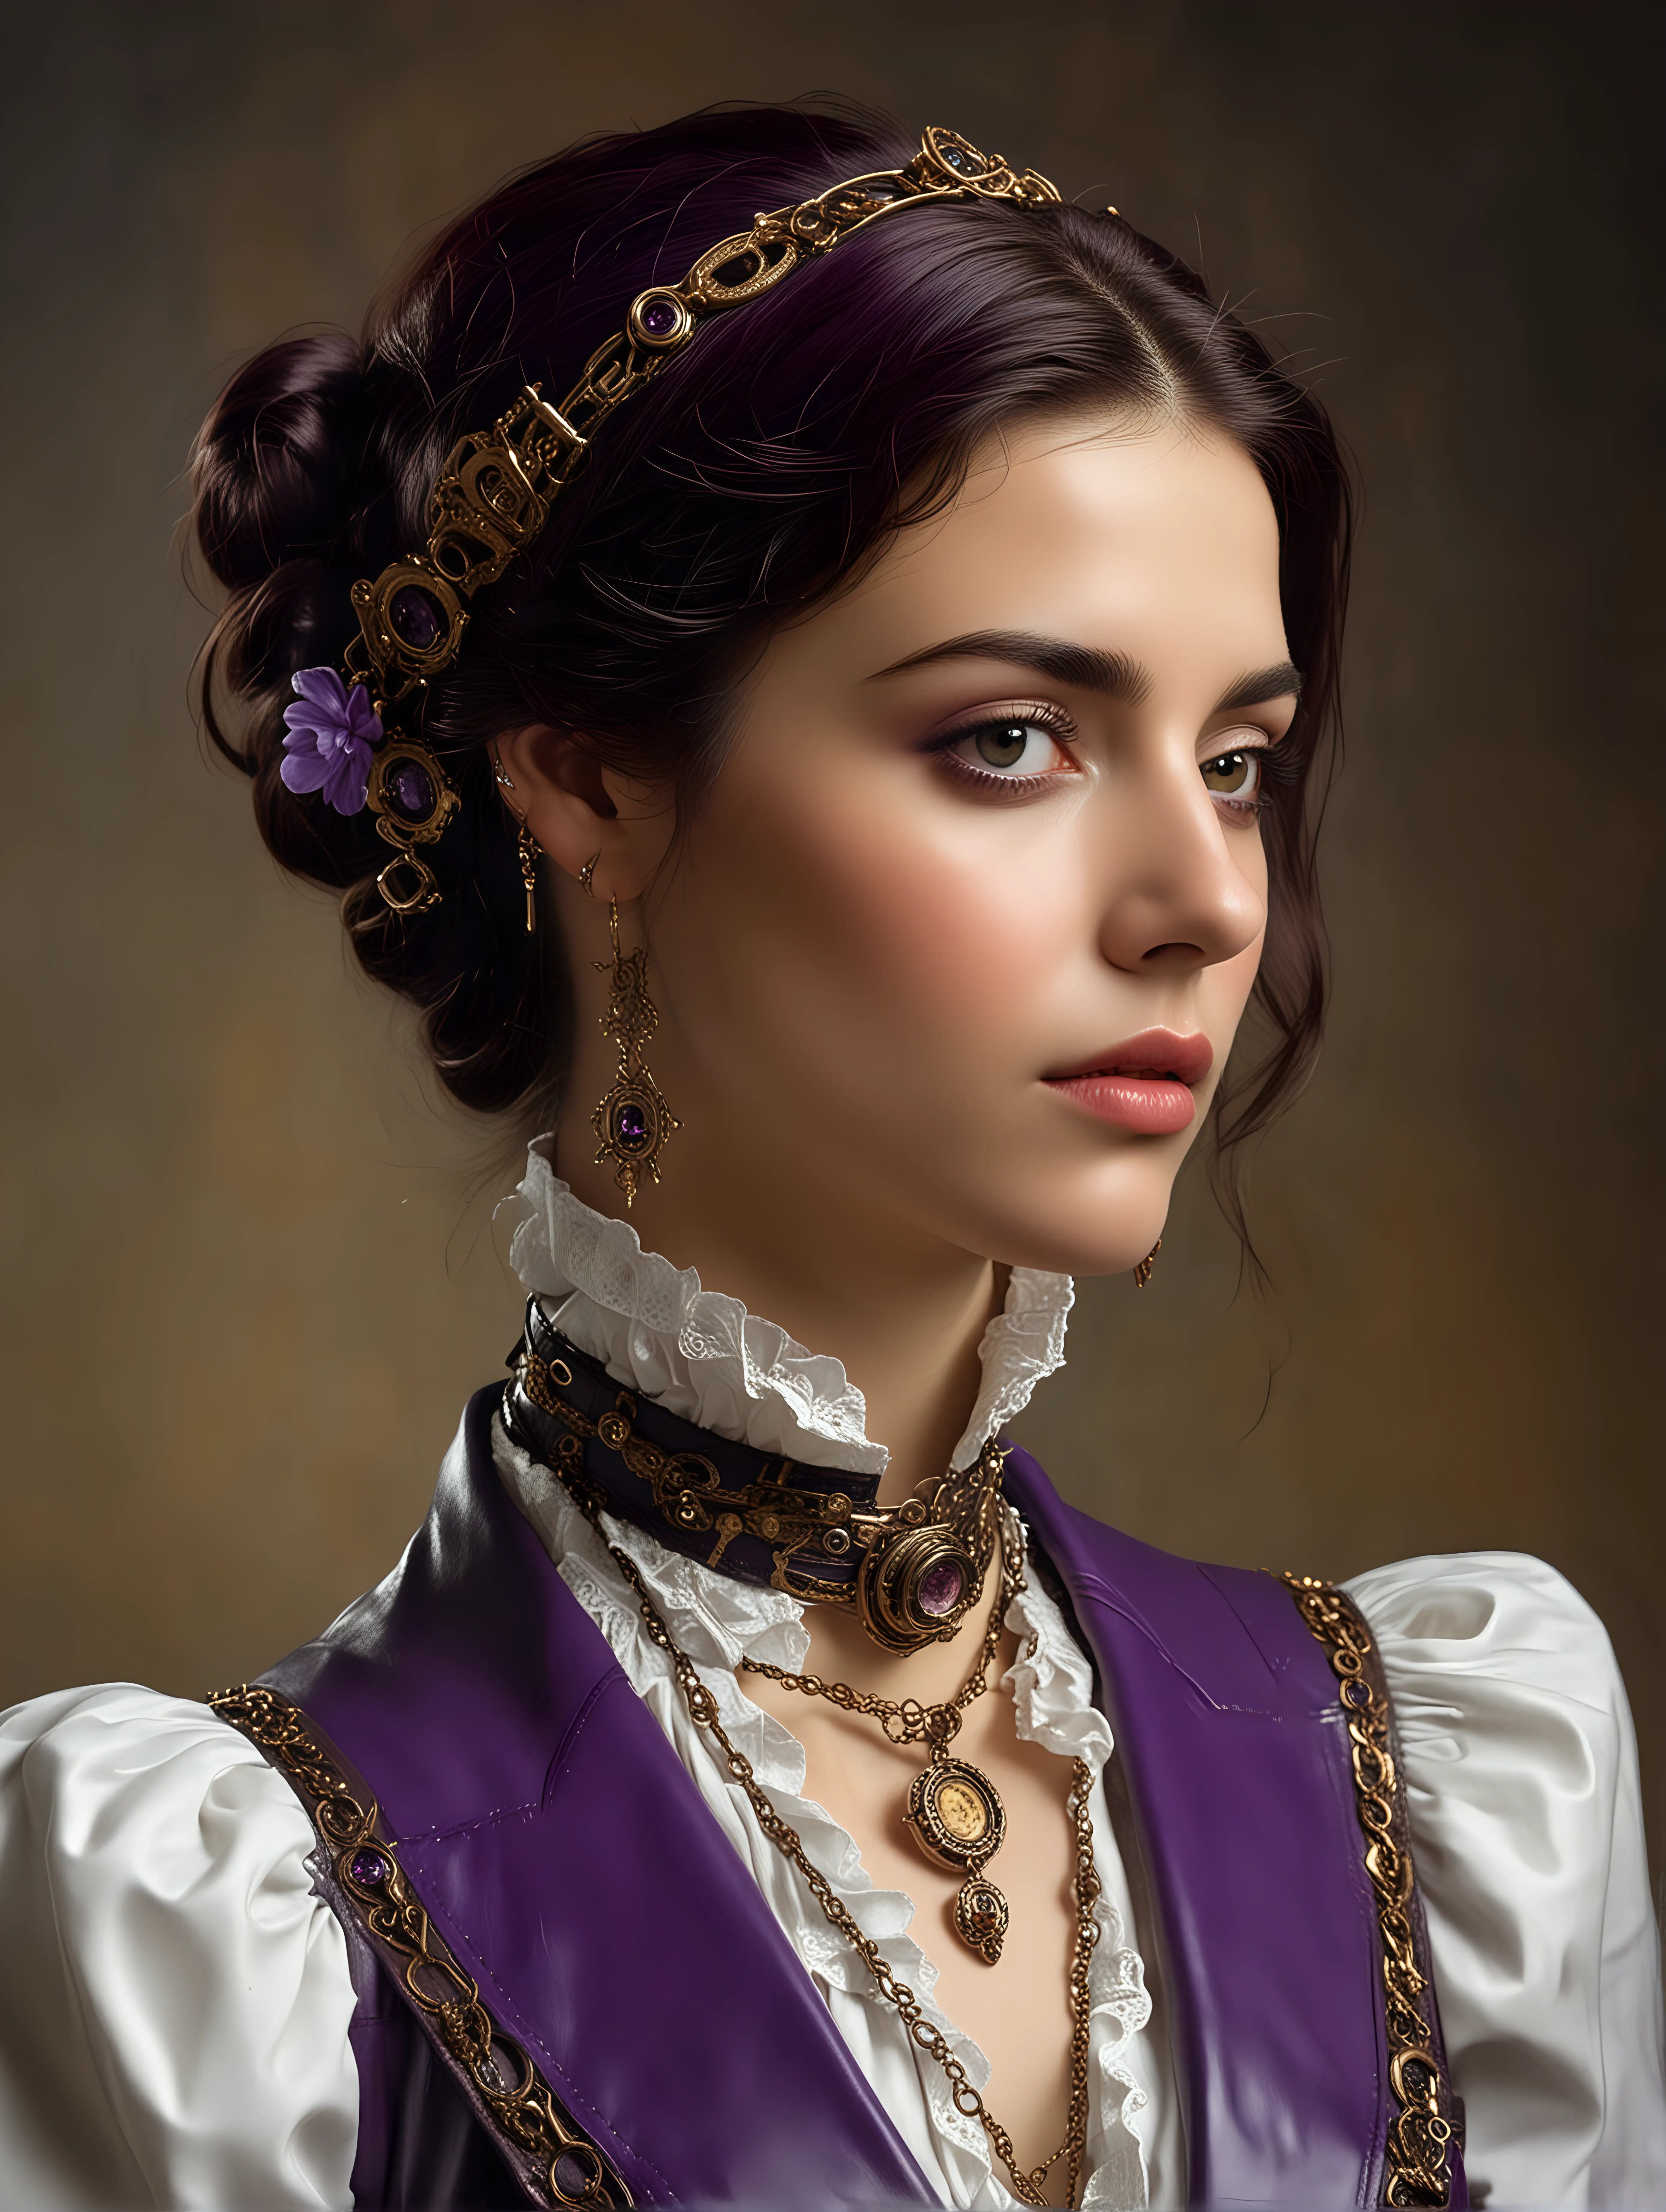 the portrait of a noble spanish woman in a leather violet and white suit, delicate steampunk jewelry, the old spanish painting masters style